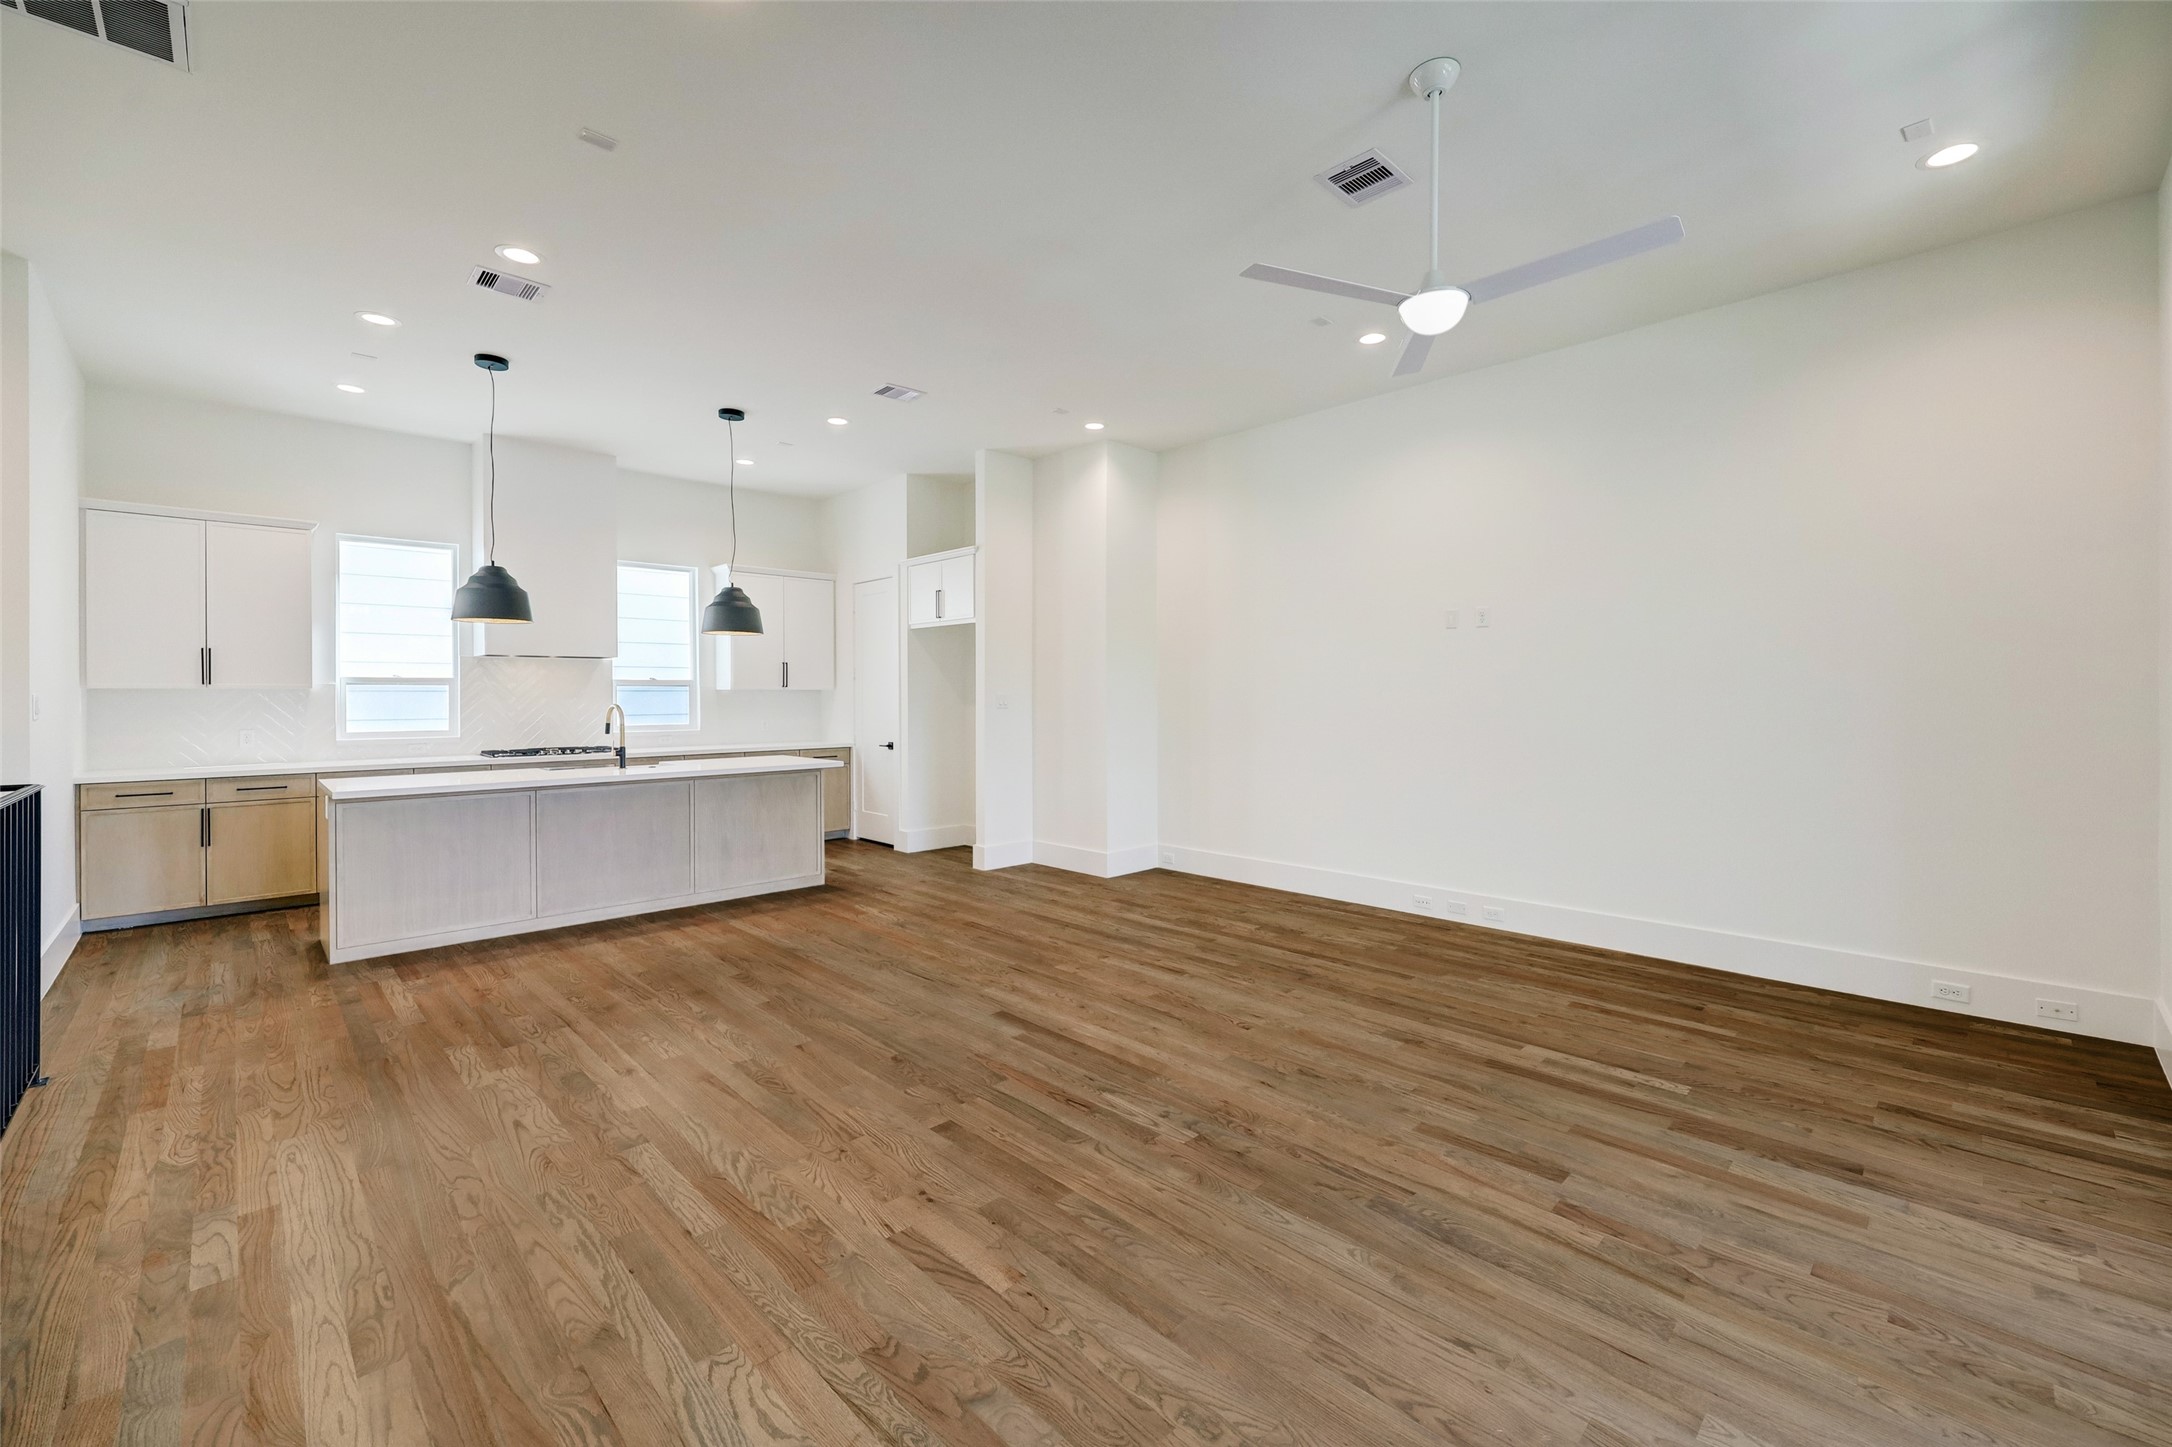 You’ll find a transitional design with exceptional premium finishes including an abundance of natural light, stunning hardwood floors, soaring 11’ ceilings and terrace, overlooking park.